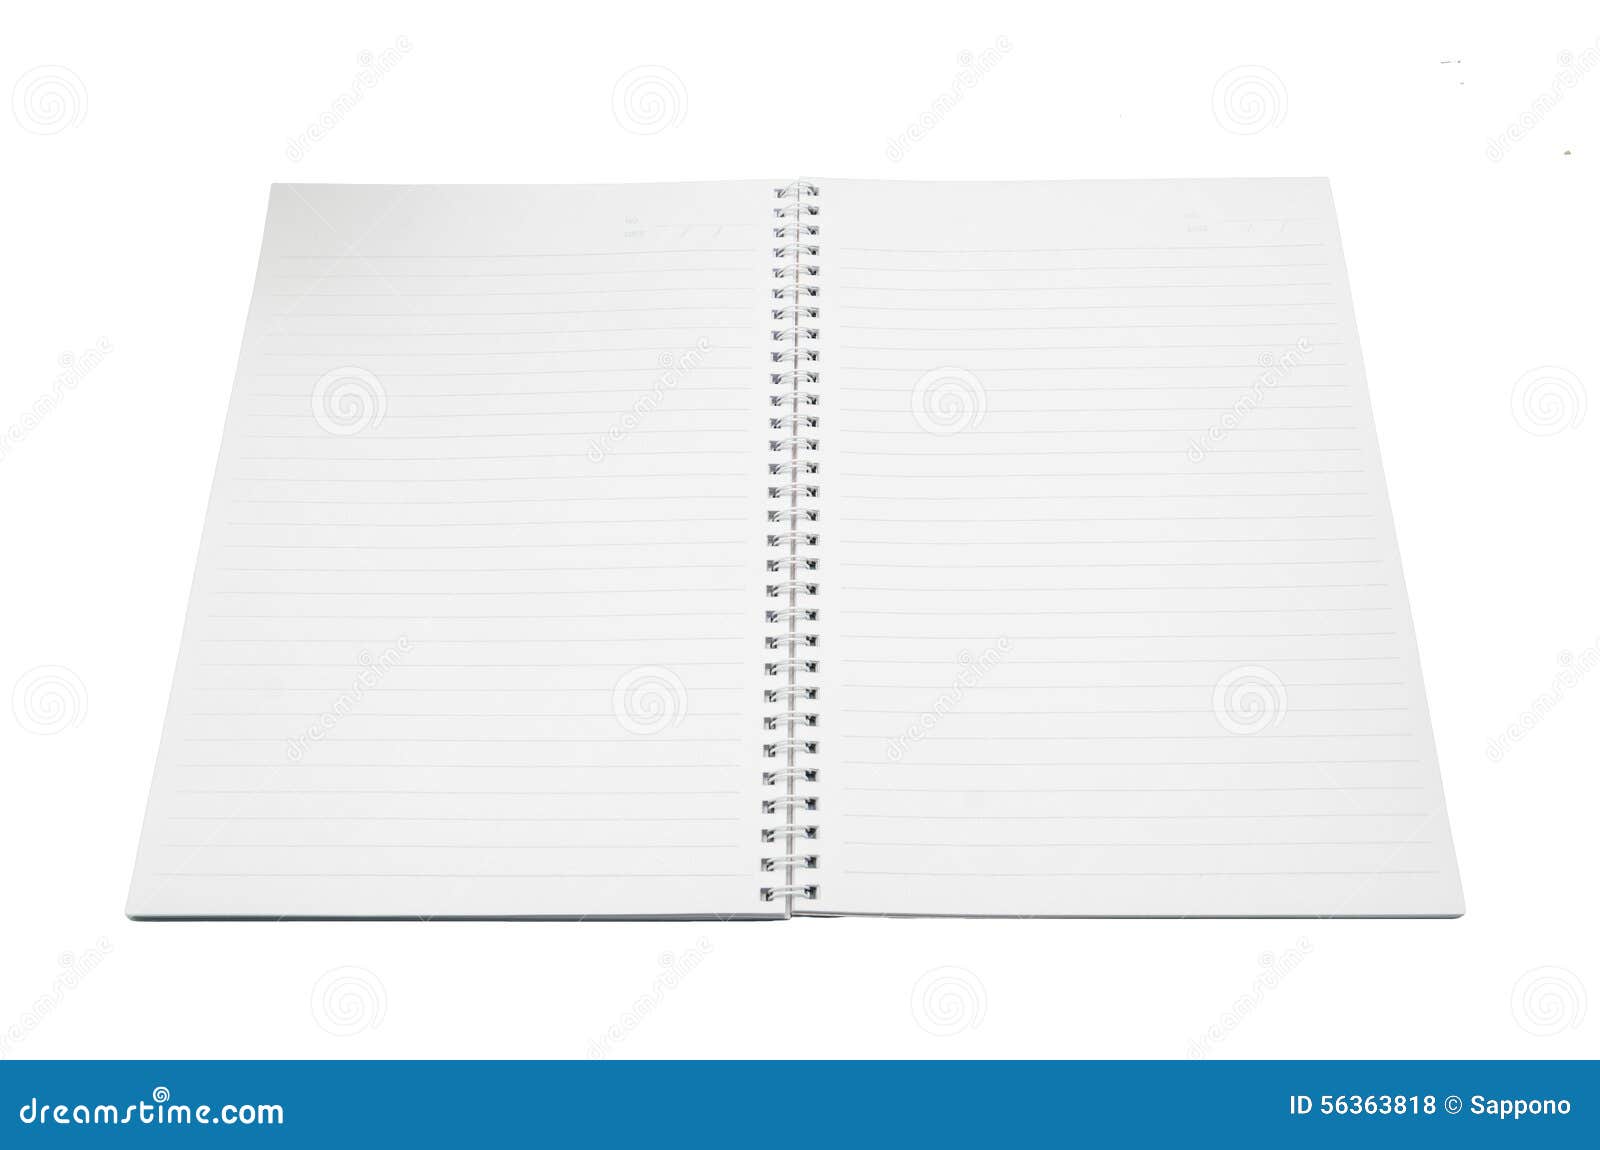 Blank notebook stock photo. Image of page, space, business - 56363818